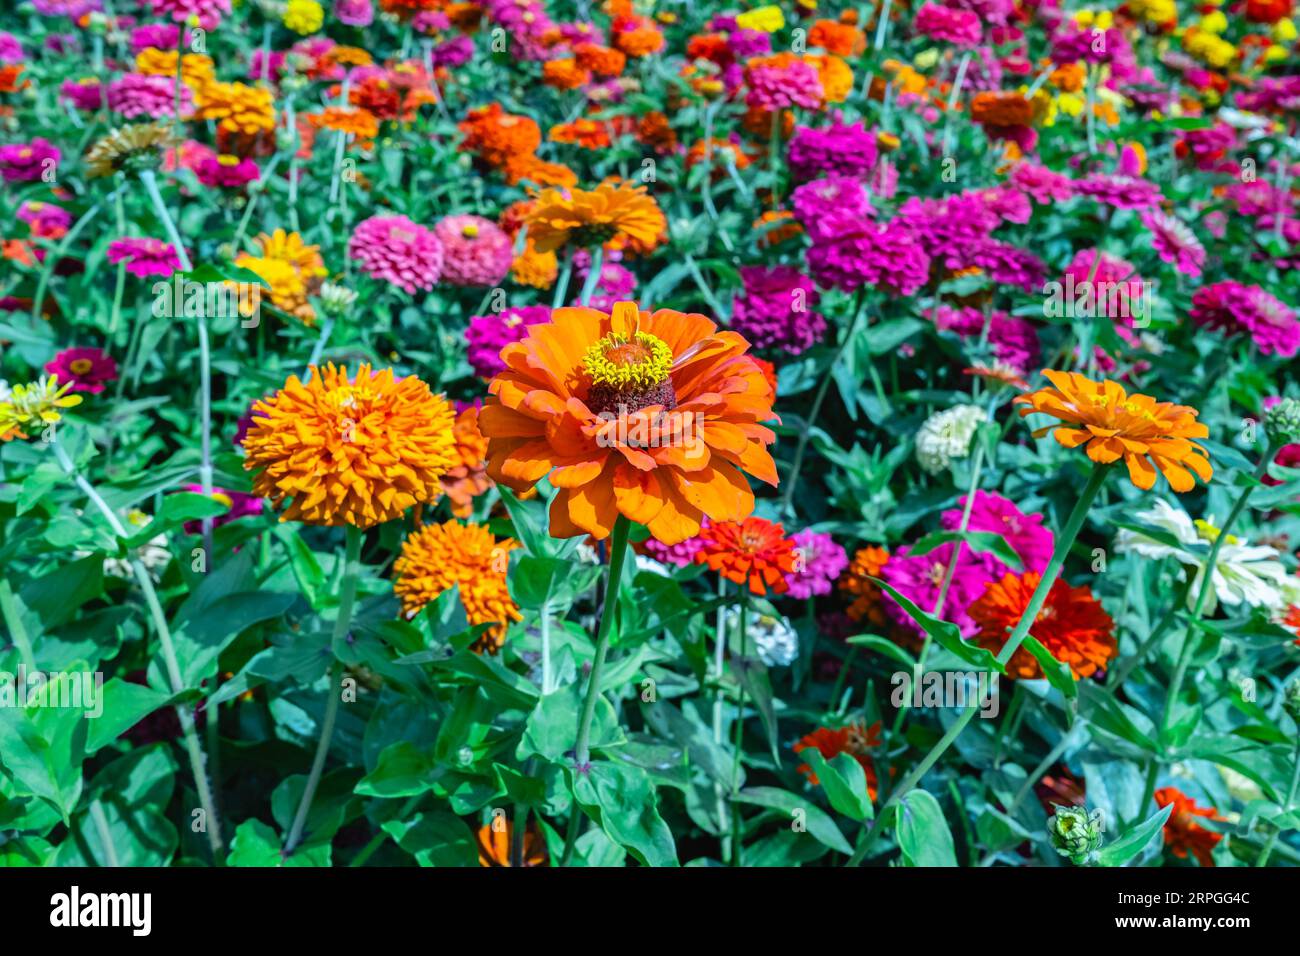 Flowers zinnia elegans. Color nature background. Zinnia violacea blooming pink red orange flower in garden flower. Garden with multicolored gorgeous f Stock Photo